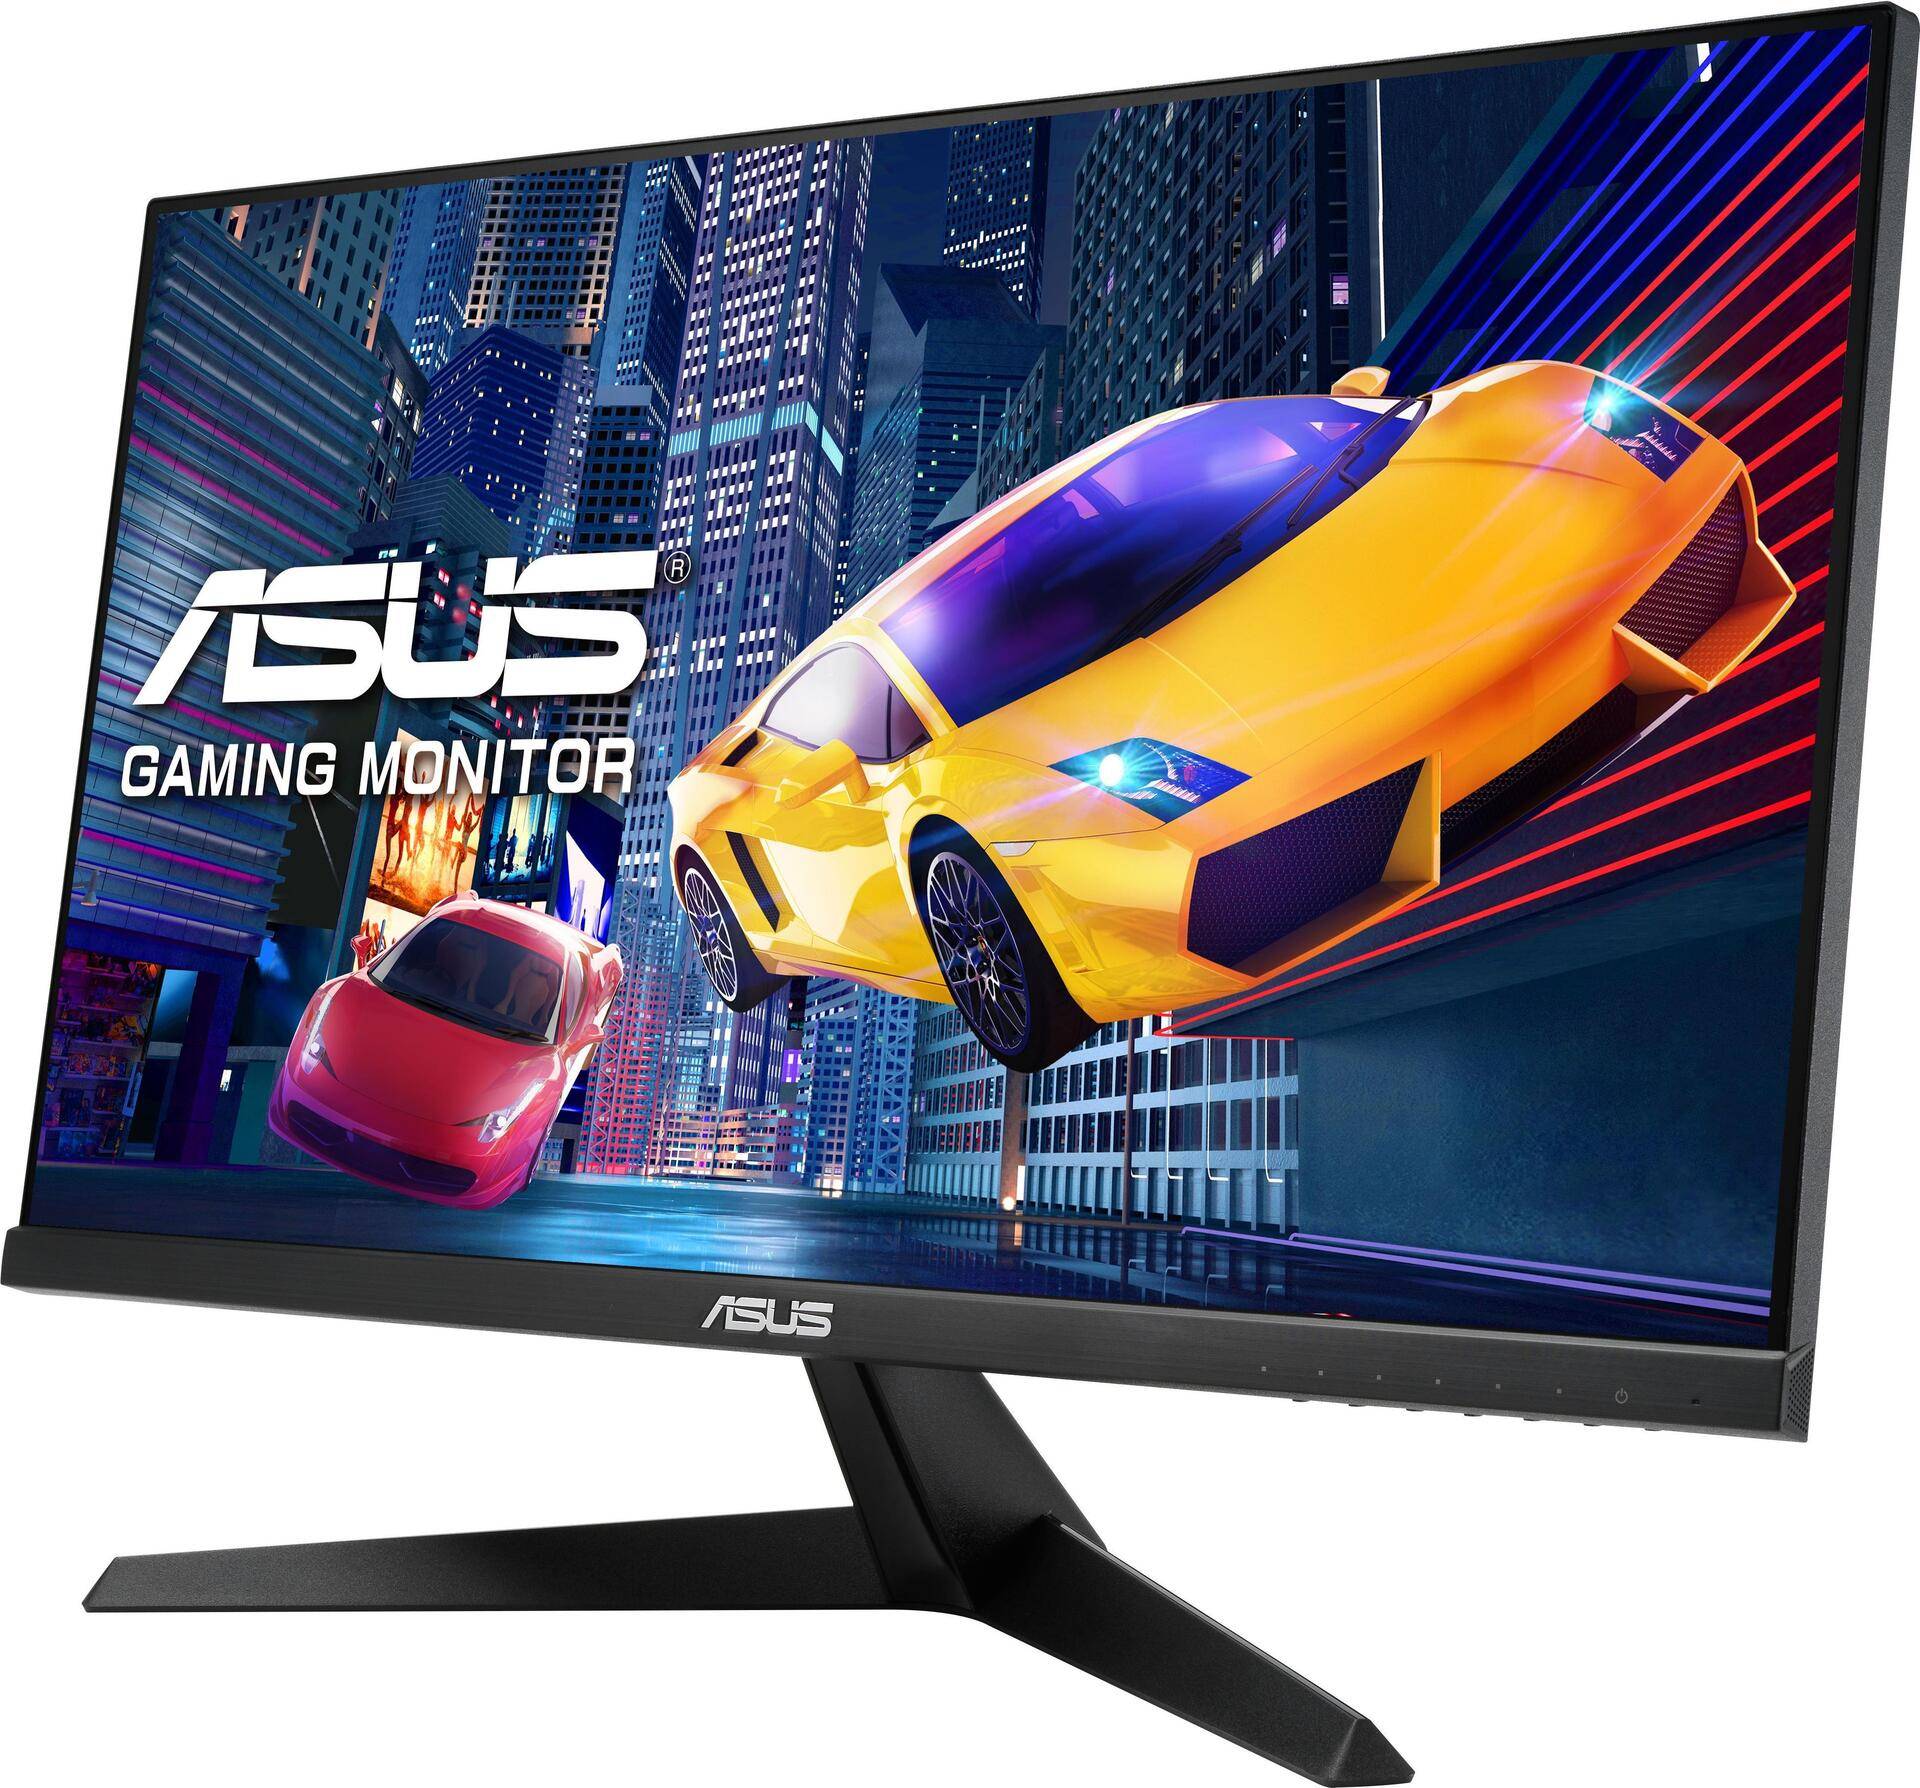 ASUS VY249HE - LED-Monitor - 60.5 cm (23.8) - 1920 x 1080 Full HD (1080p) @ 75 Hz - IPS - 250 cd/m² - 1000:1 - 1 ms - HDMI, VGA von Asus